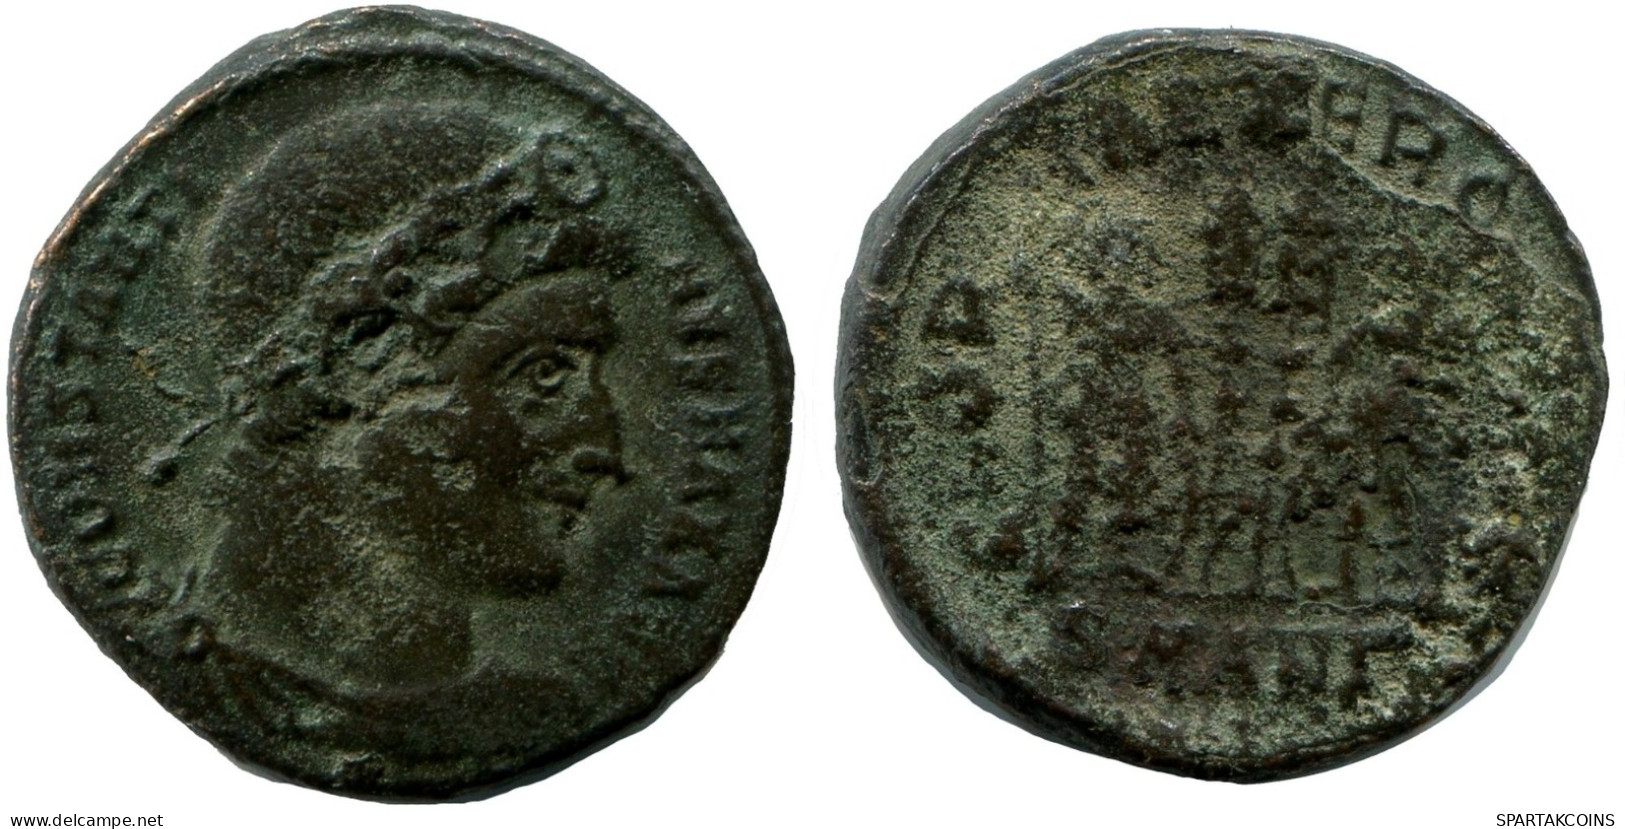 CONSTANTINE I MINTED IN ANTIOCH FROM THE ROYAL ONTARIO MUSEUM #ANC10716.14.F.A - El Impero Christiano (307 / 363)